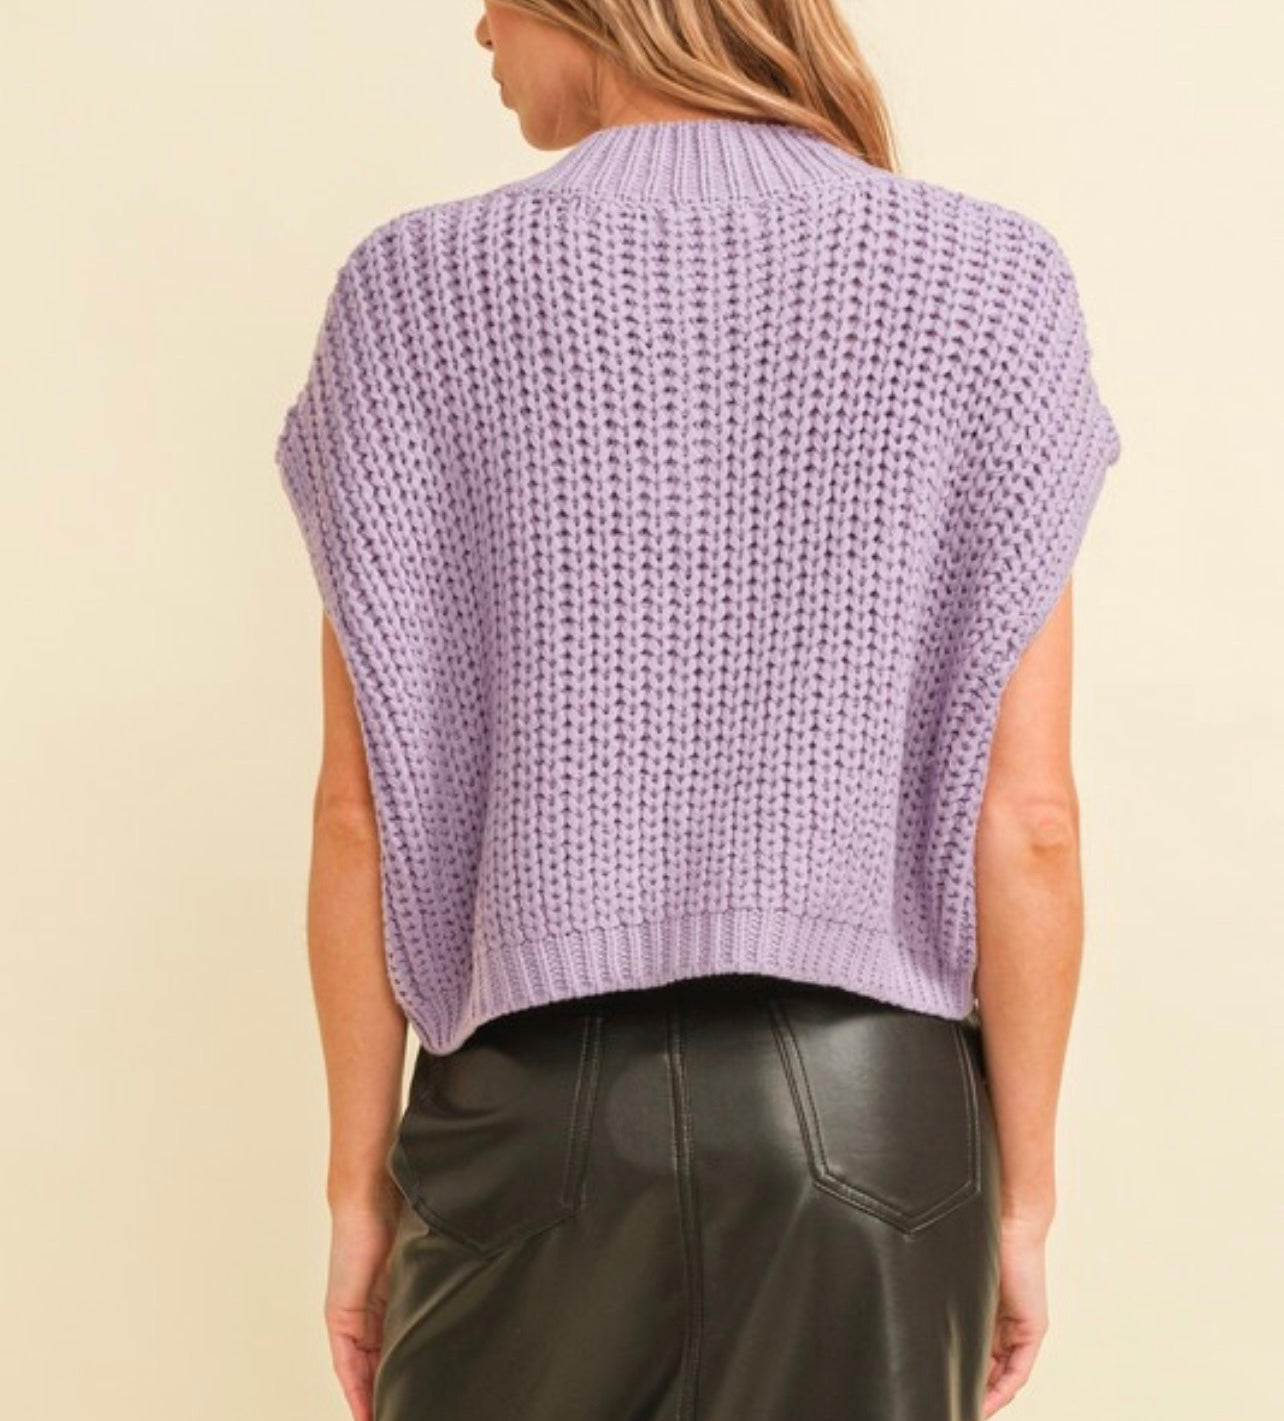 Lavender Knitted Sweater Vest